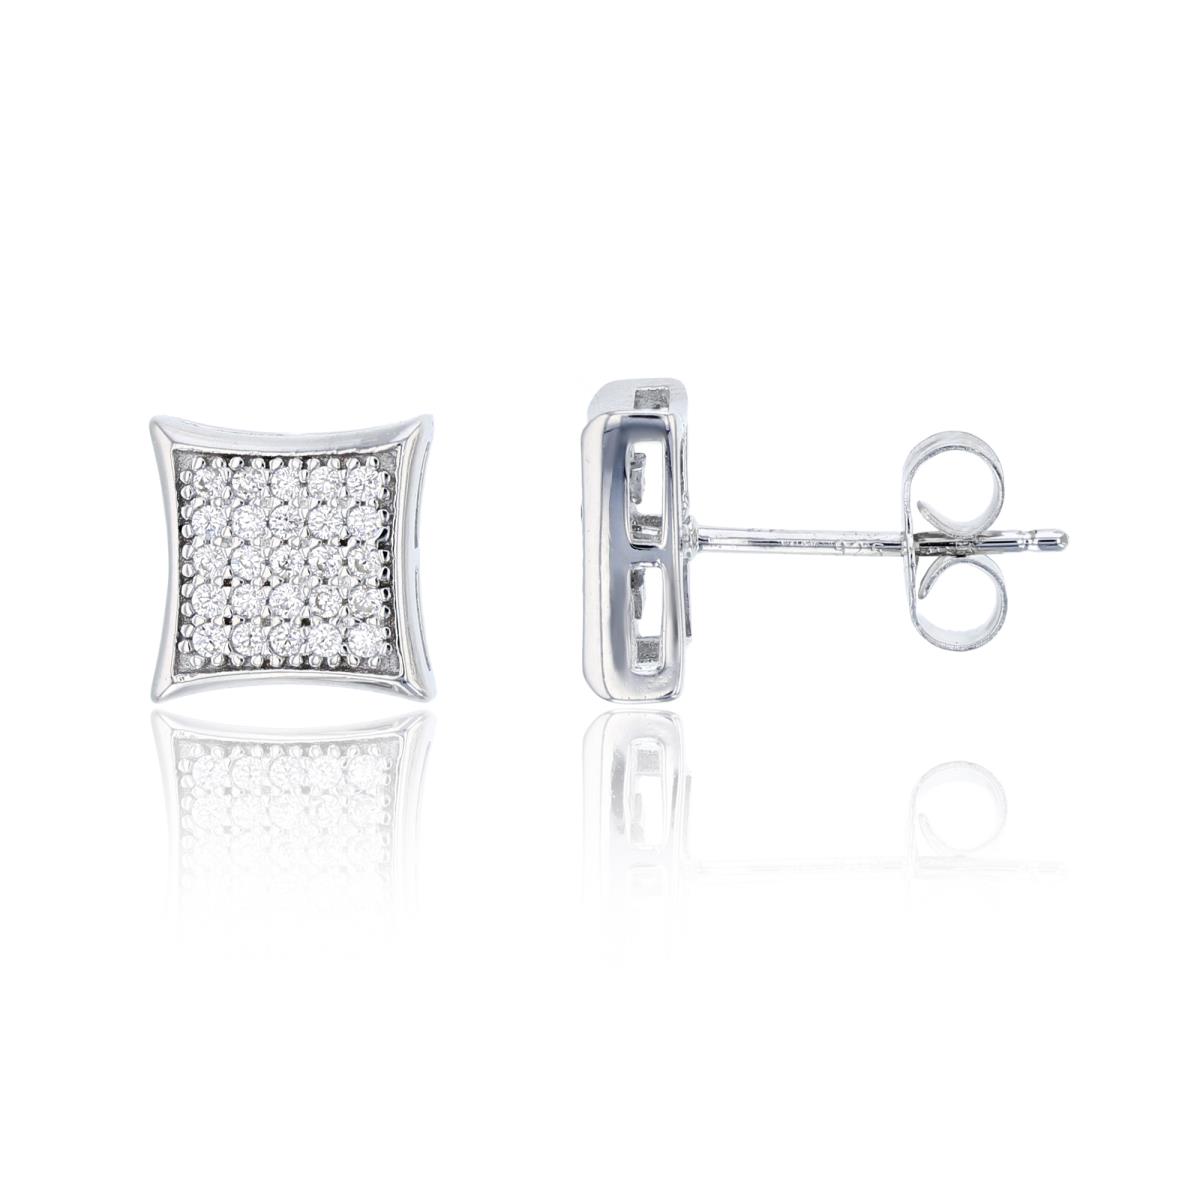 Sterling Silver 9.3x9.3mm  Curved Square Micropave Stud Earring